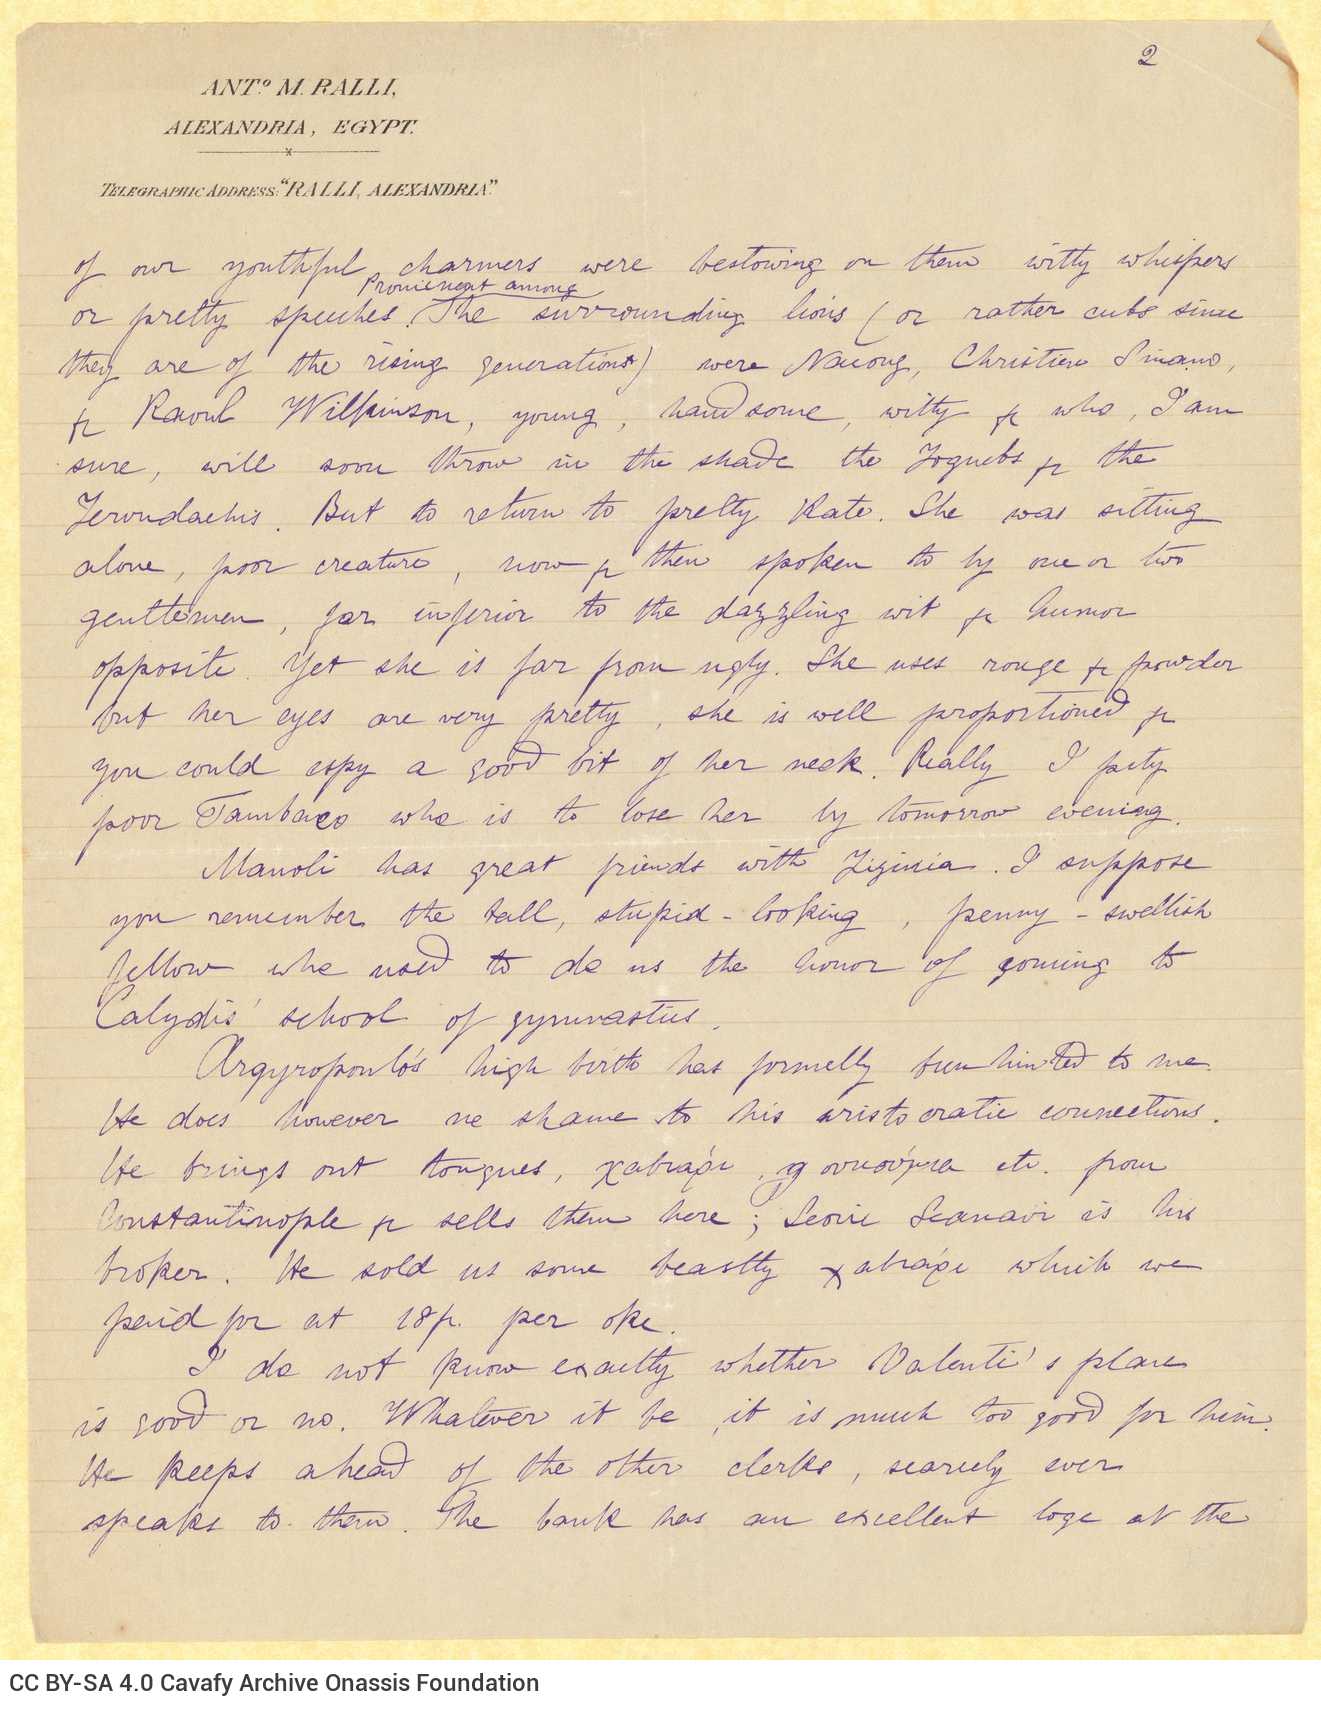 Handwritten letter by Mike Ralli to Cavafy on the recto of three sheets. It is a reply to a letter dated 25 January. Informat